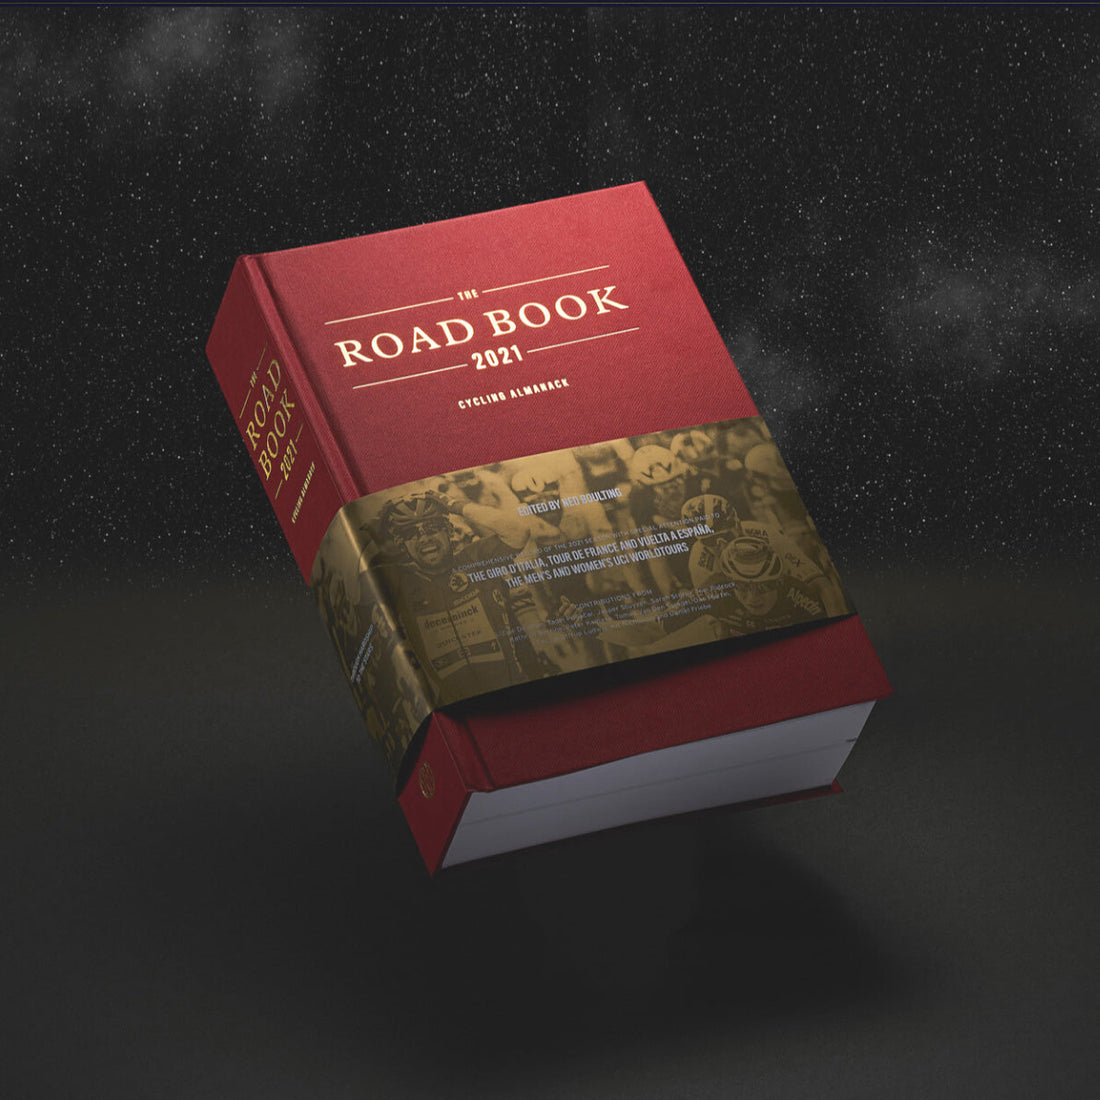 The Road Book 2021 (Signed)